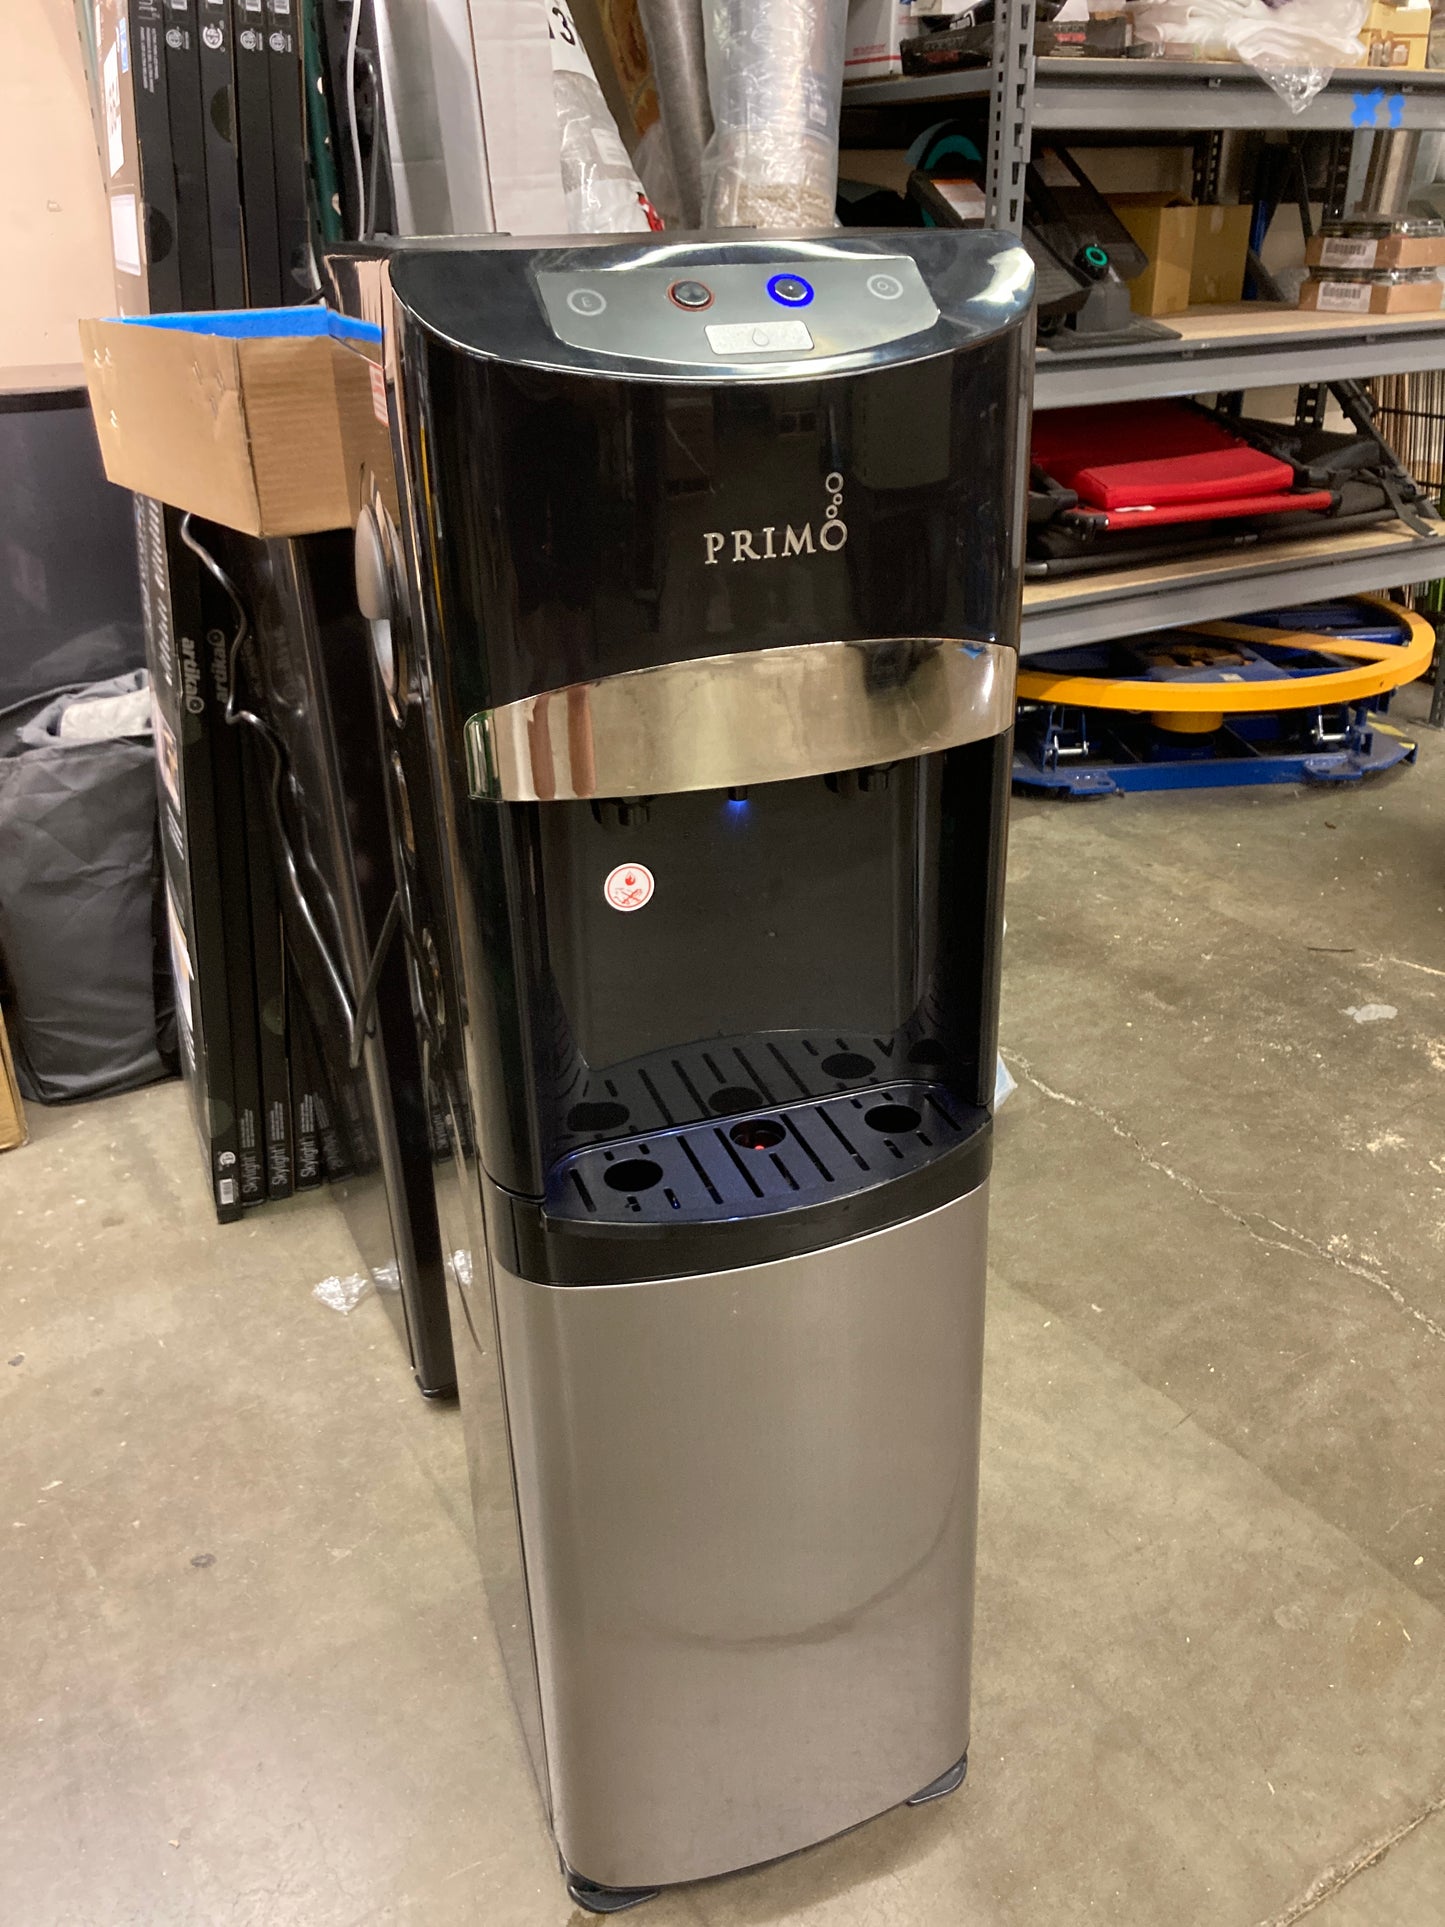 Like NEW - Costco - Primo Electronic Control Black & Stainless Steel Bottom Load Water Cooler - Retail $239